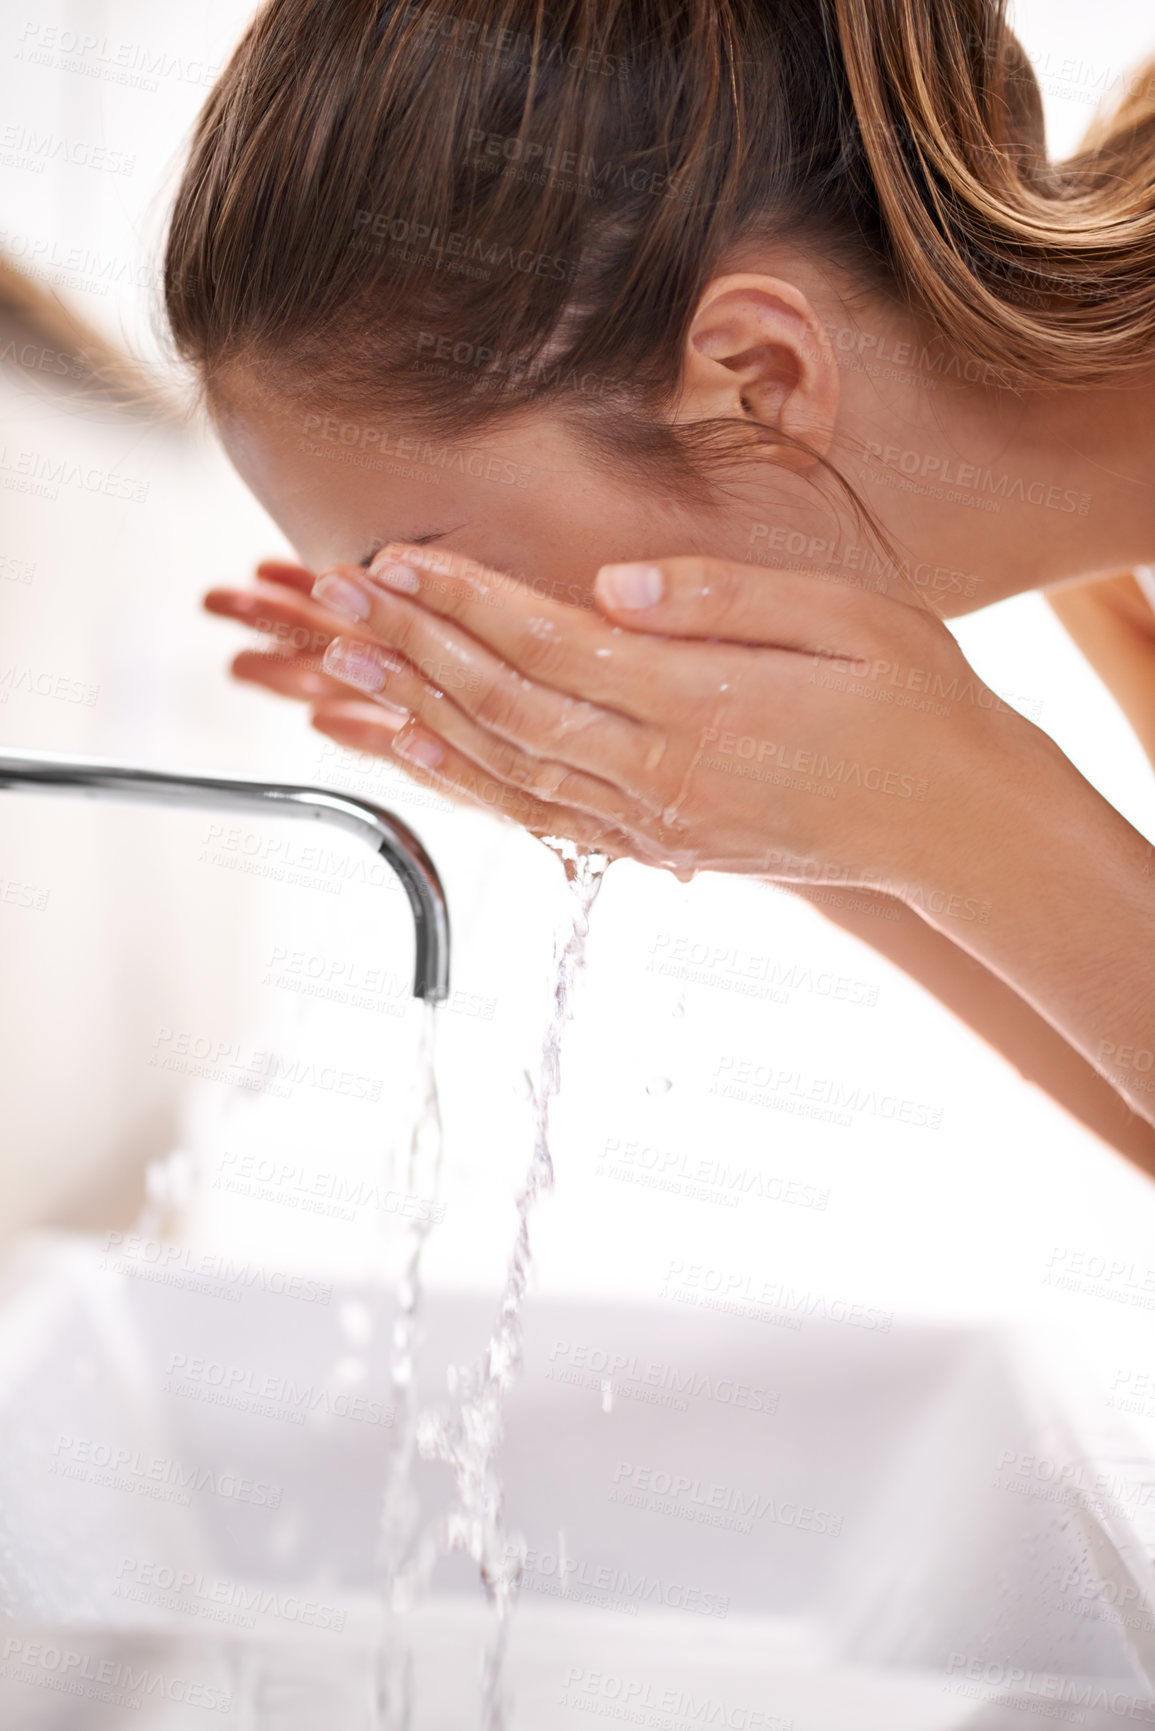 Buy stock photo Closeup shot of a young woman washing her face over a sink